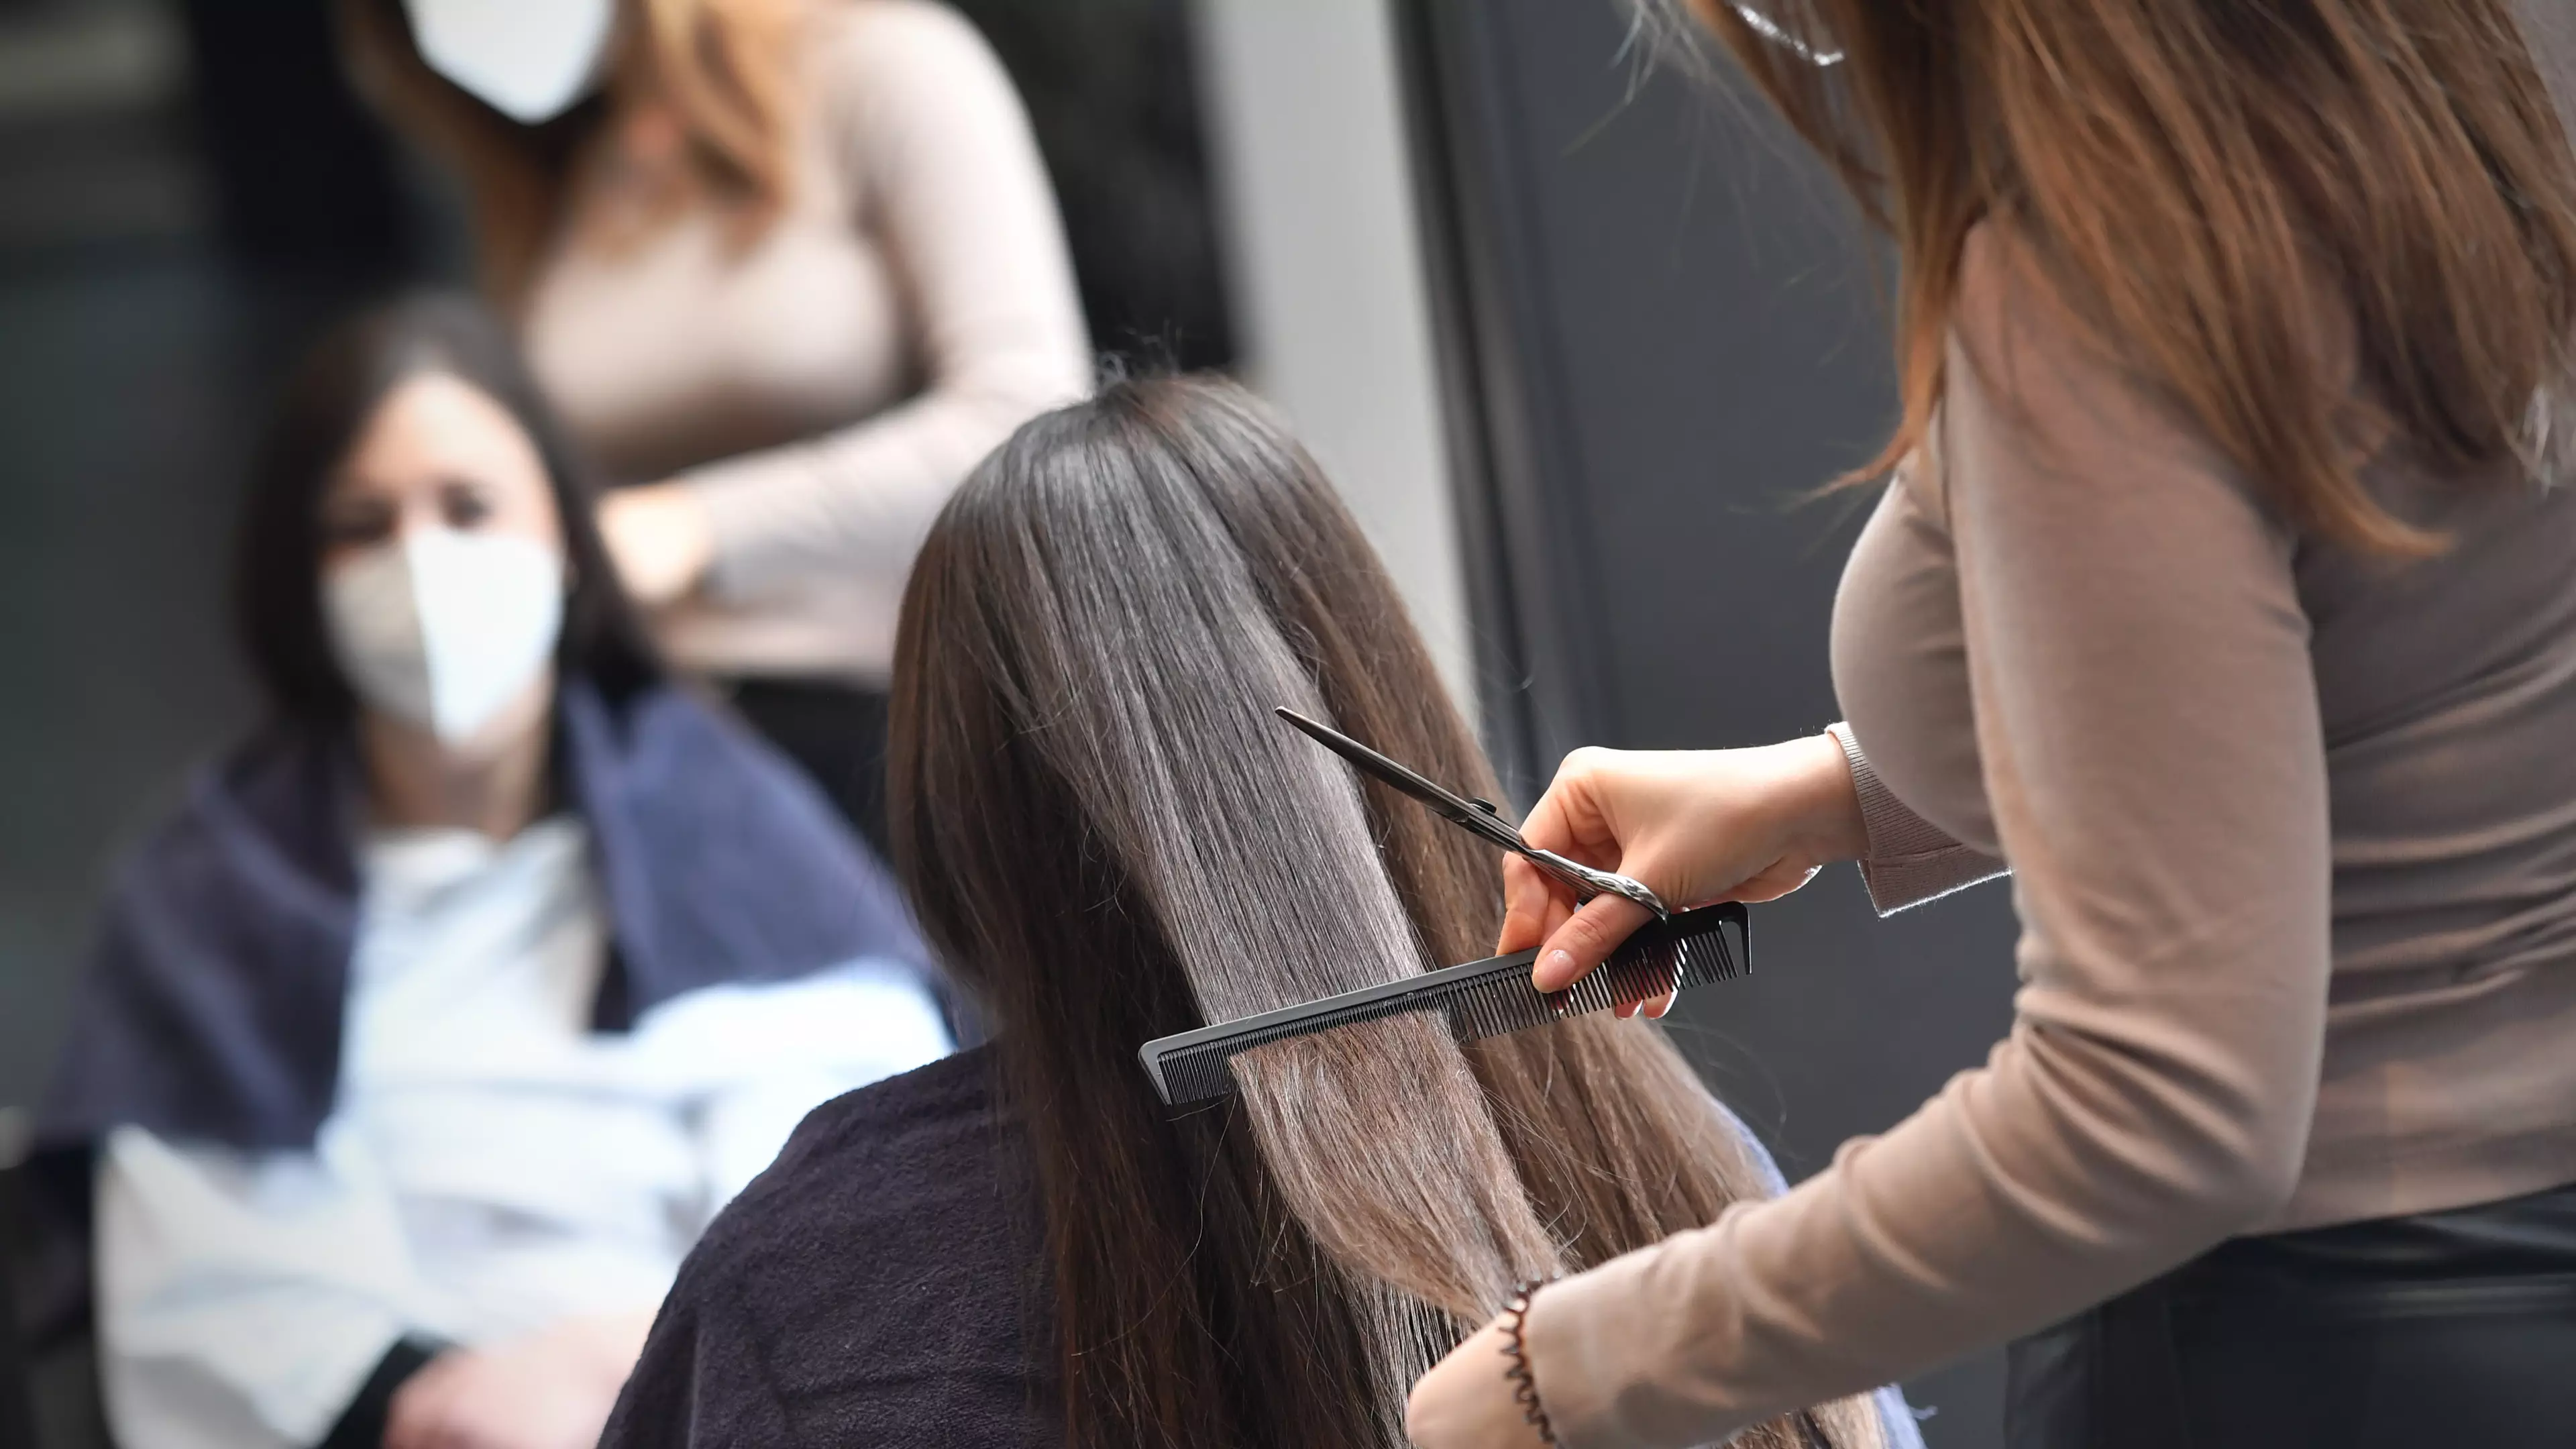 Hairdressers To Stay Closed Until Late April At Least